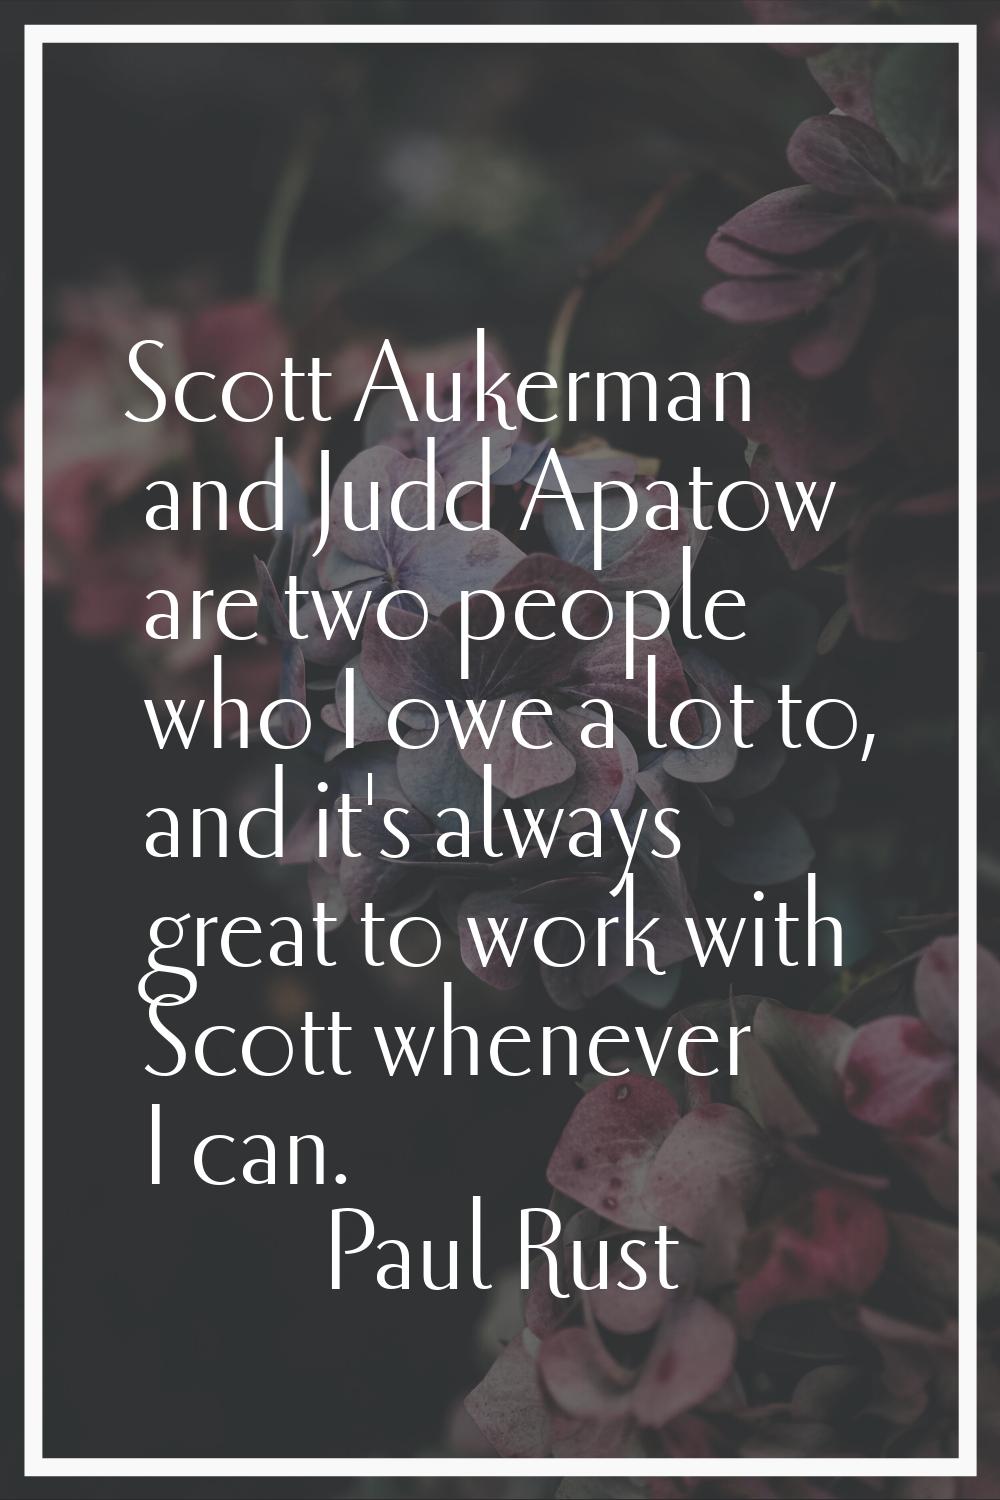 Scott Aukerman and Judd Apatow are two people who I owe a lot to, and it's always great to work wit